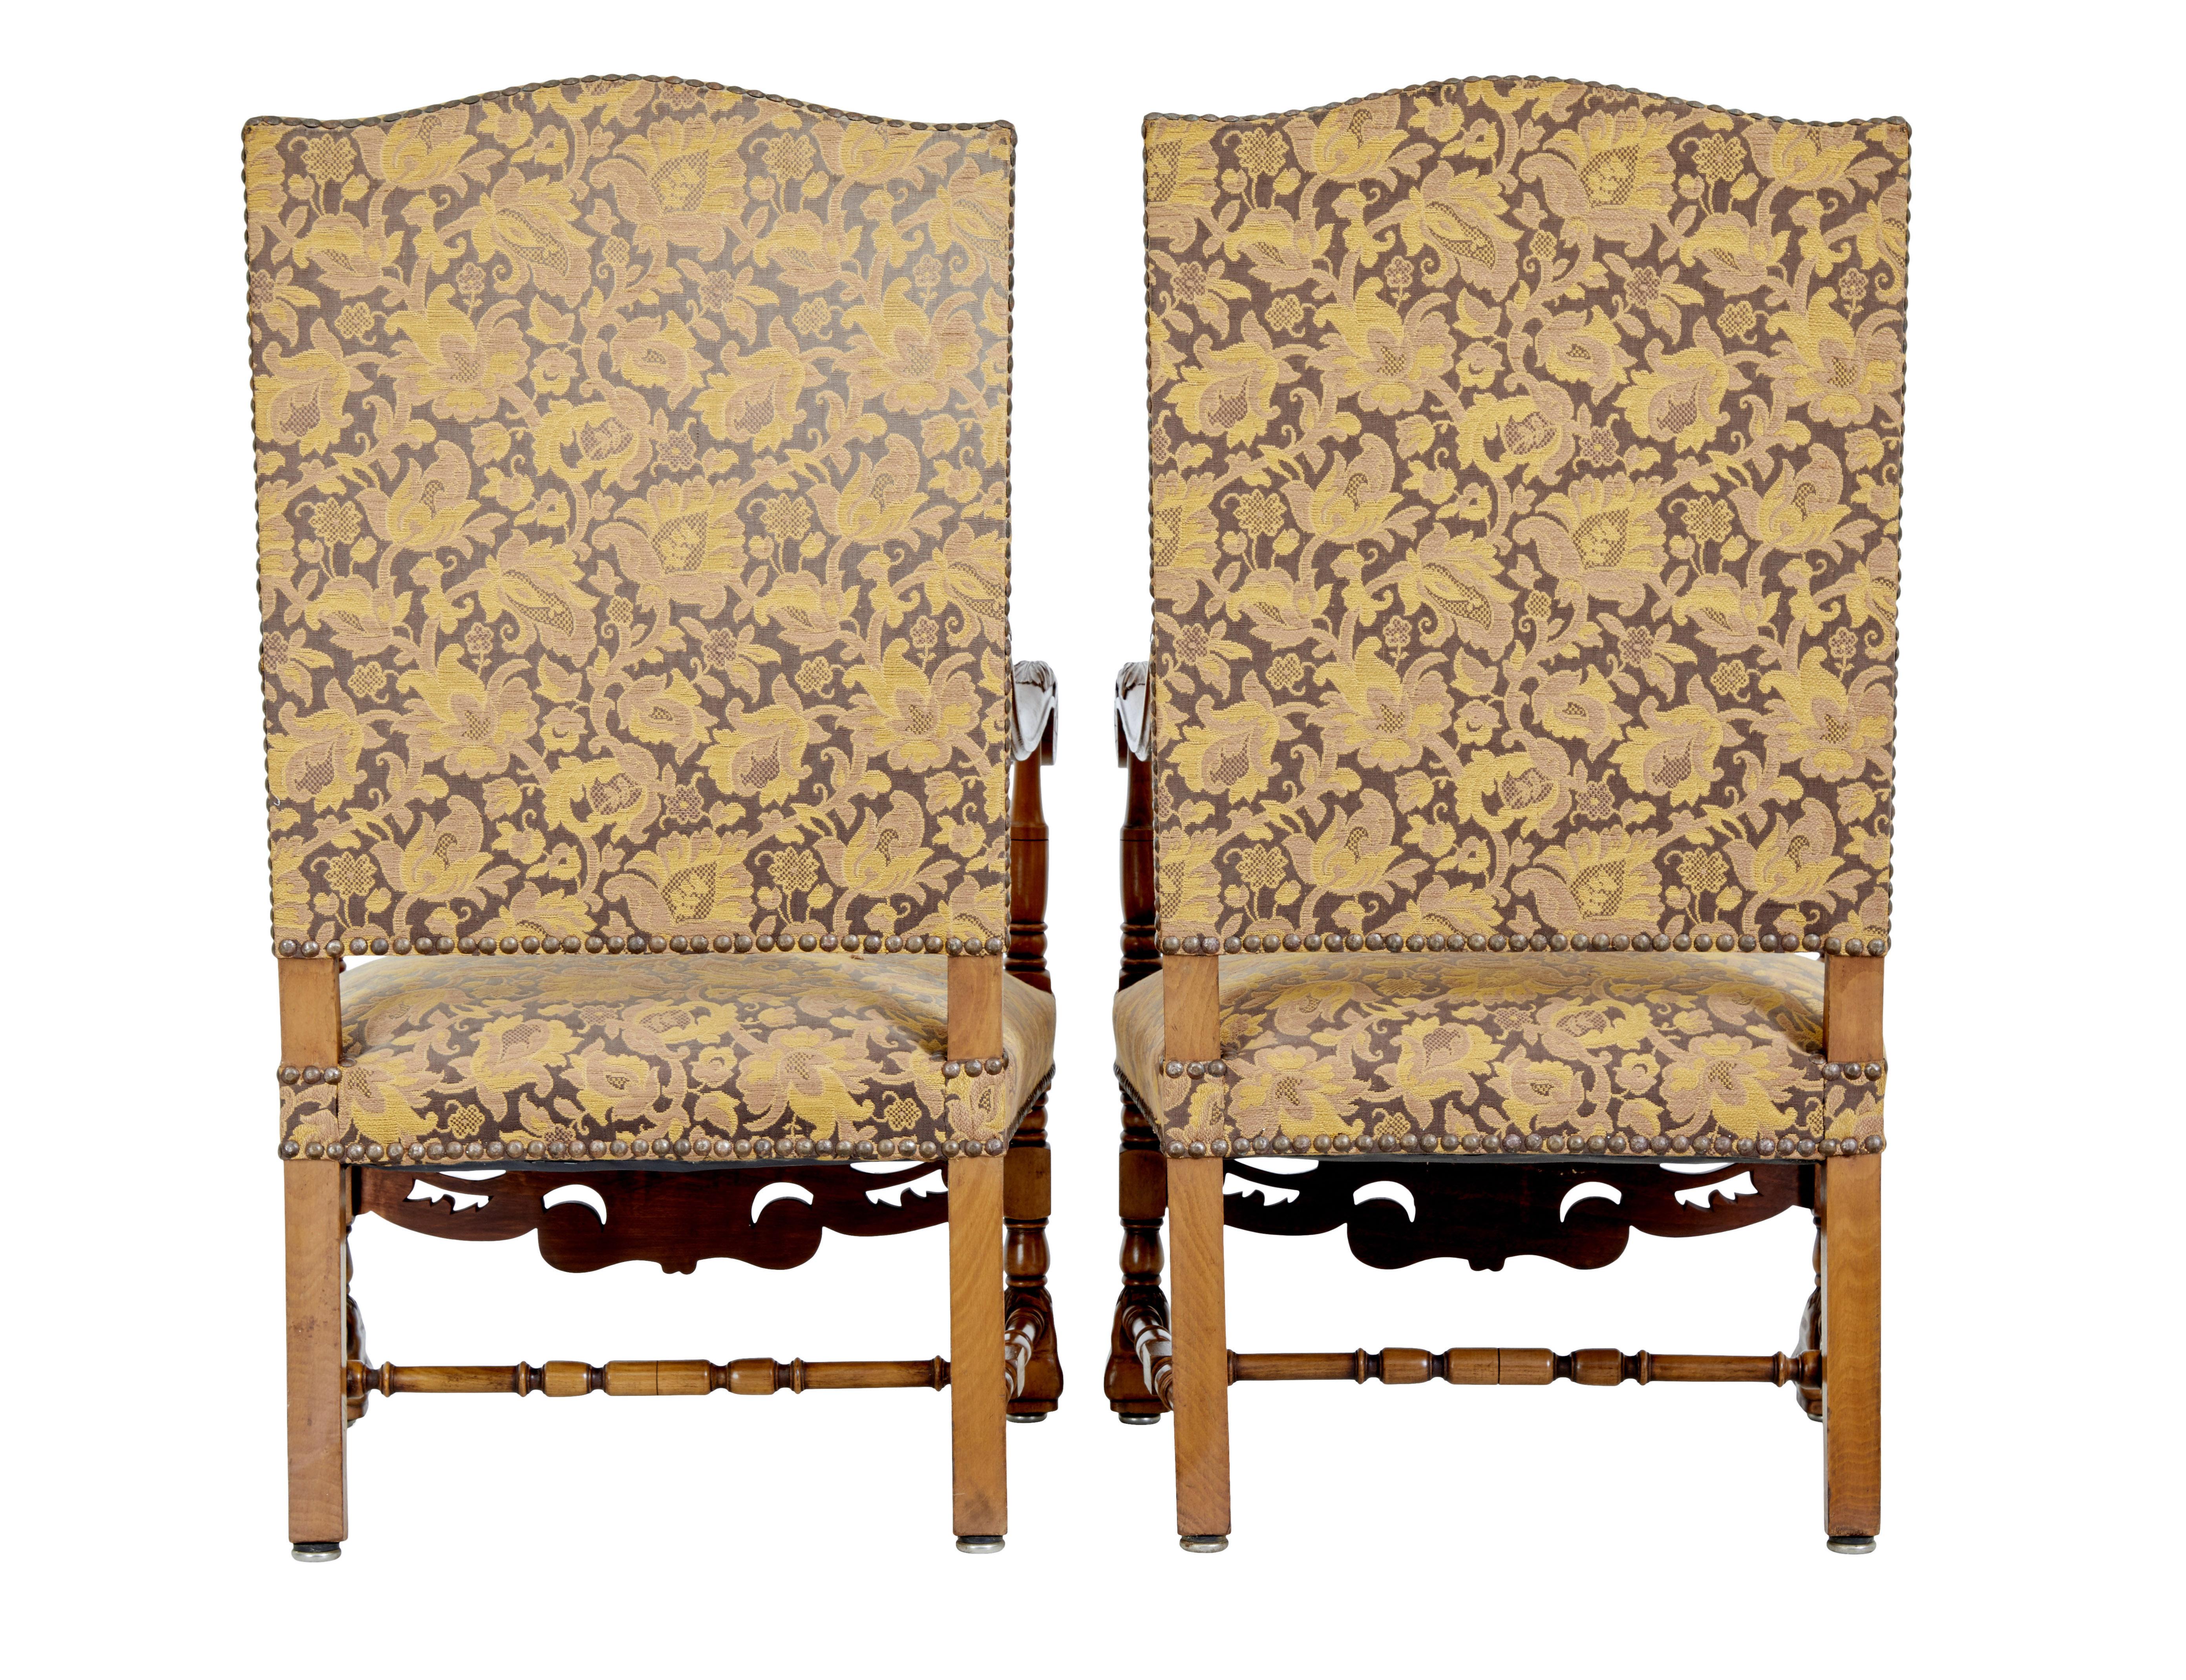 Baroque Revival Pair of 19th century carved French baroque throne armchairs